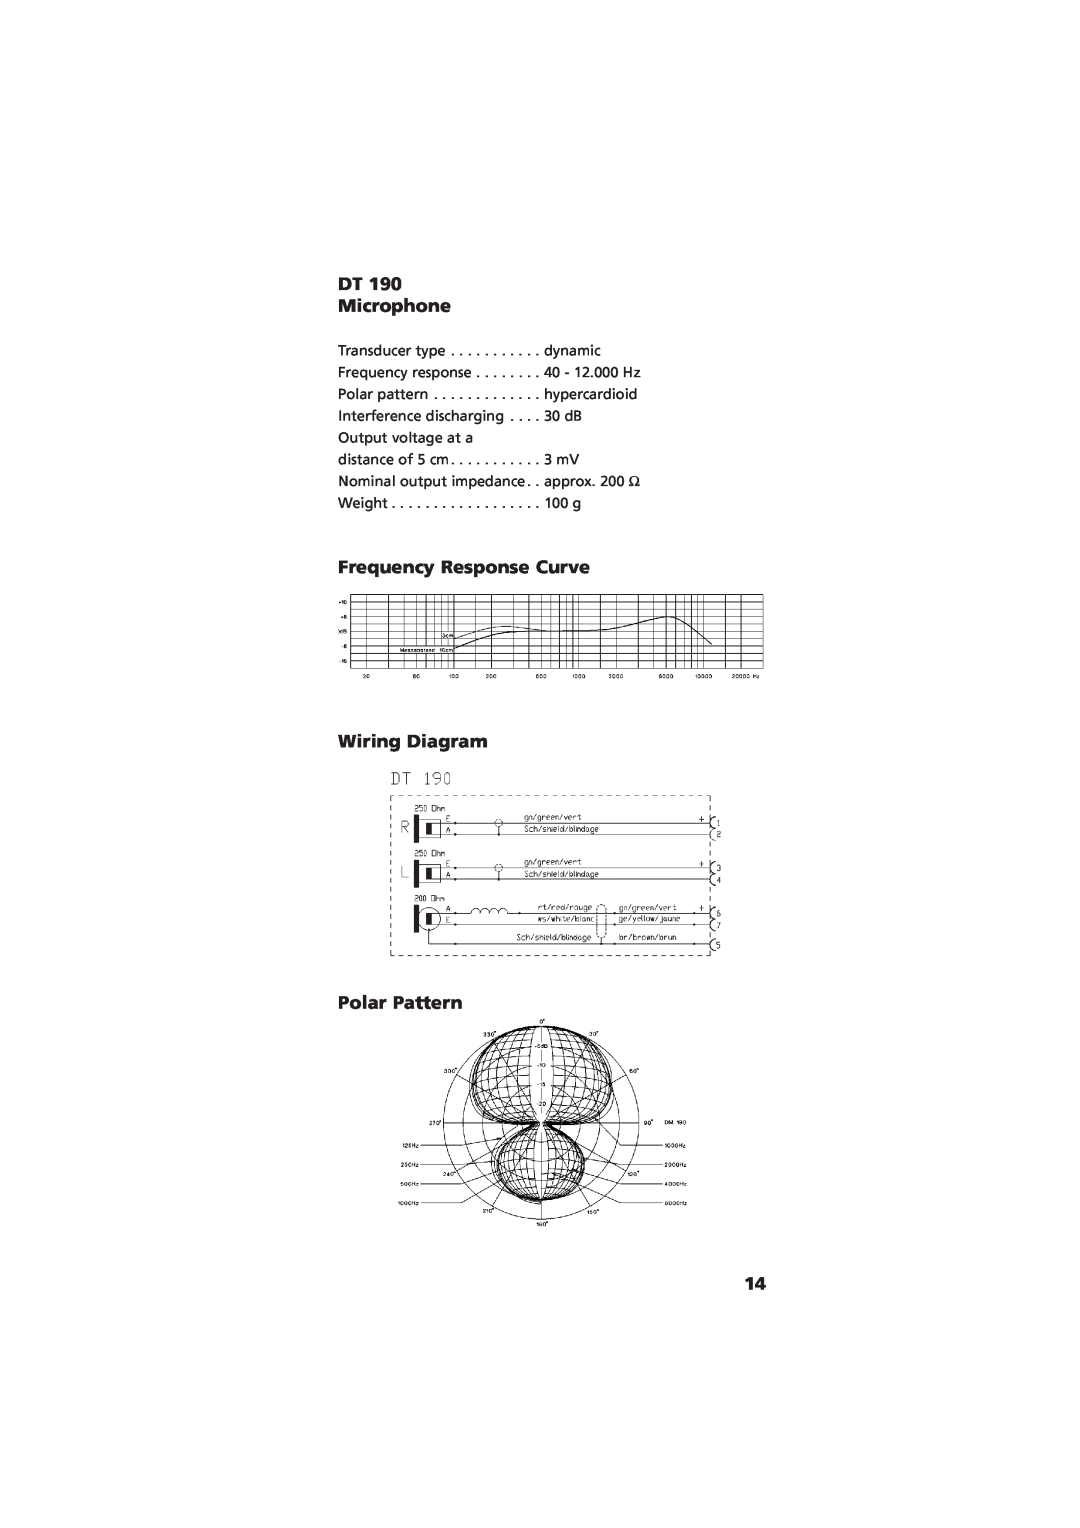 NEC DT 190, DT 150 manual DT Microphone, Frequency Response Curve Wiring Diagram, Polar Pattern 